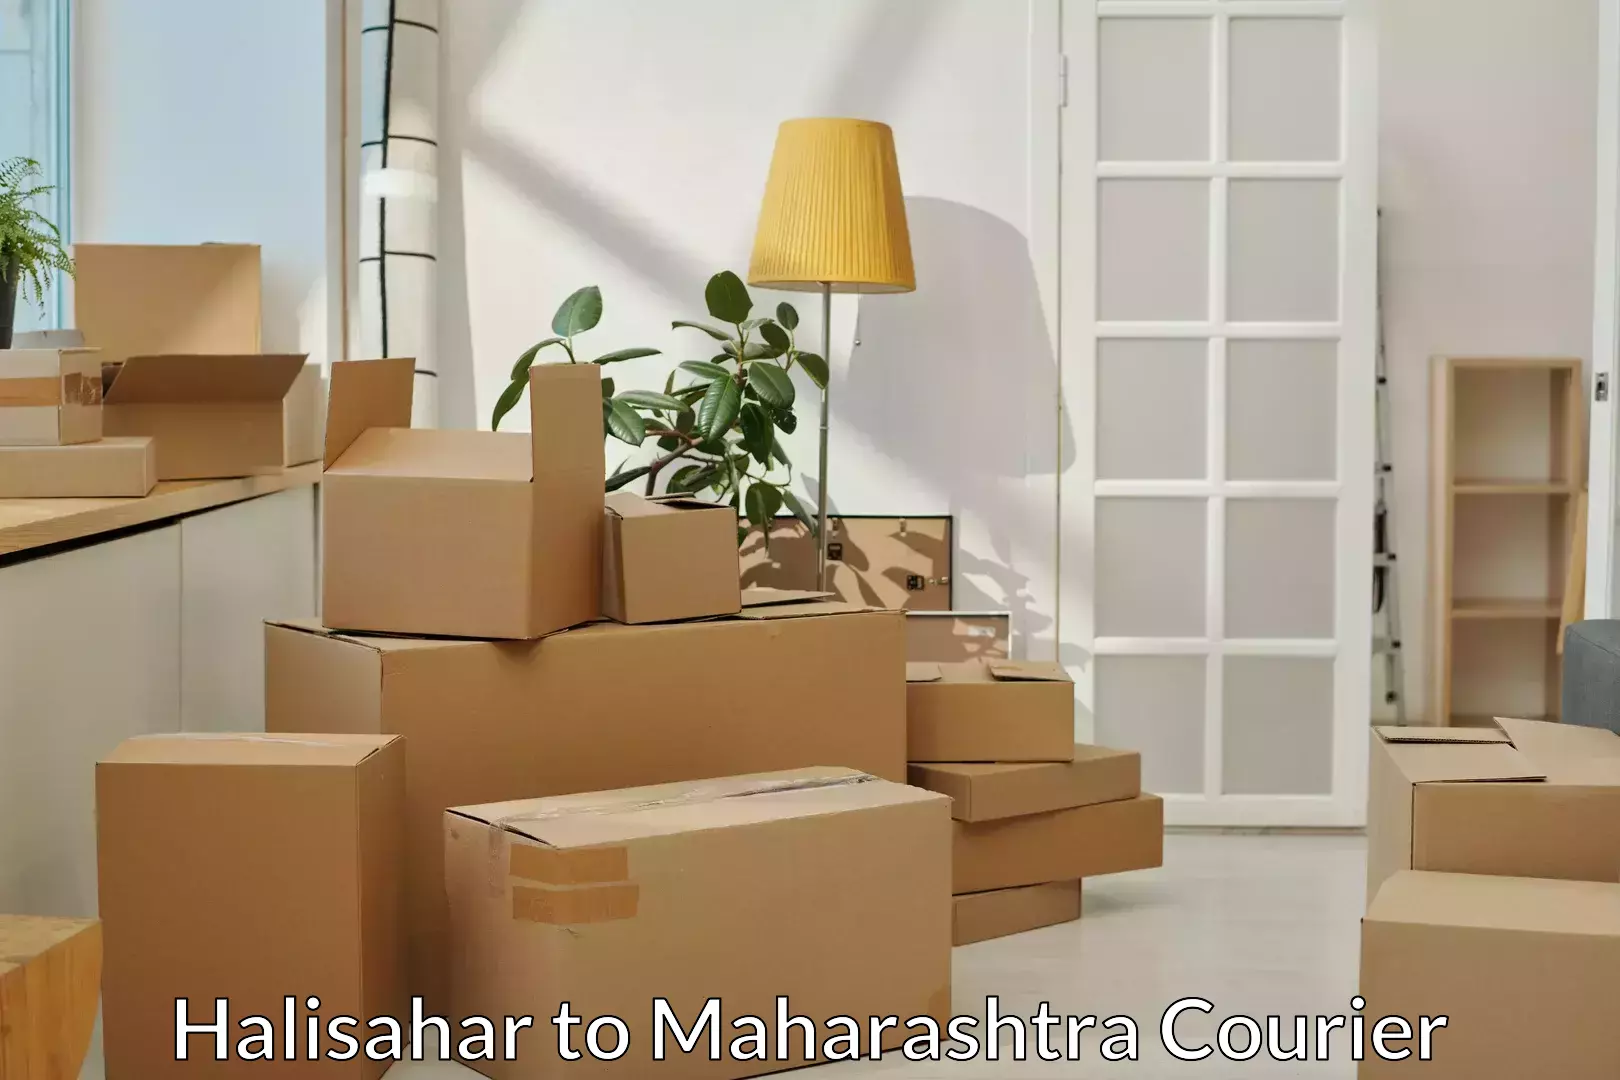 Dependable moving services in Halisahar to Kalyan Dombivli